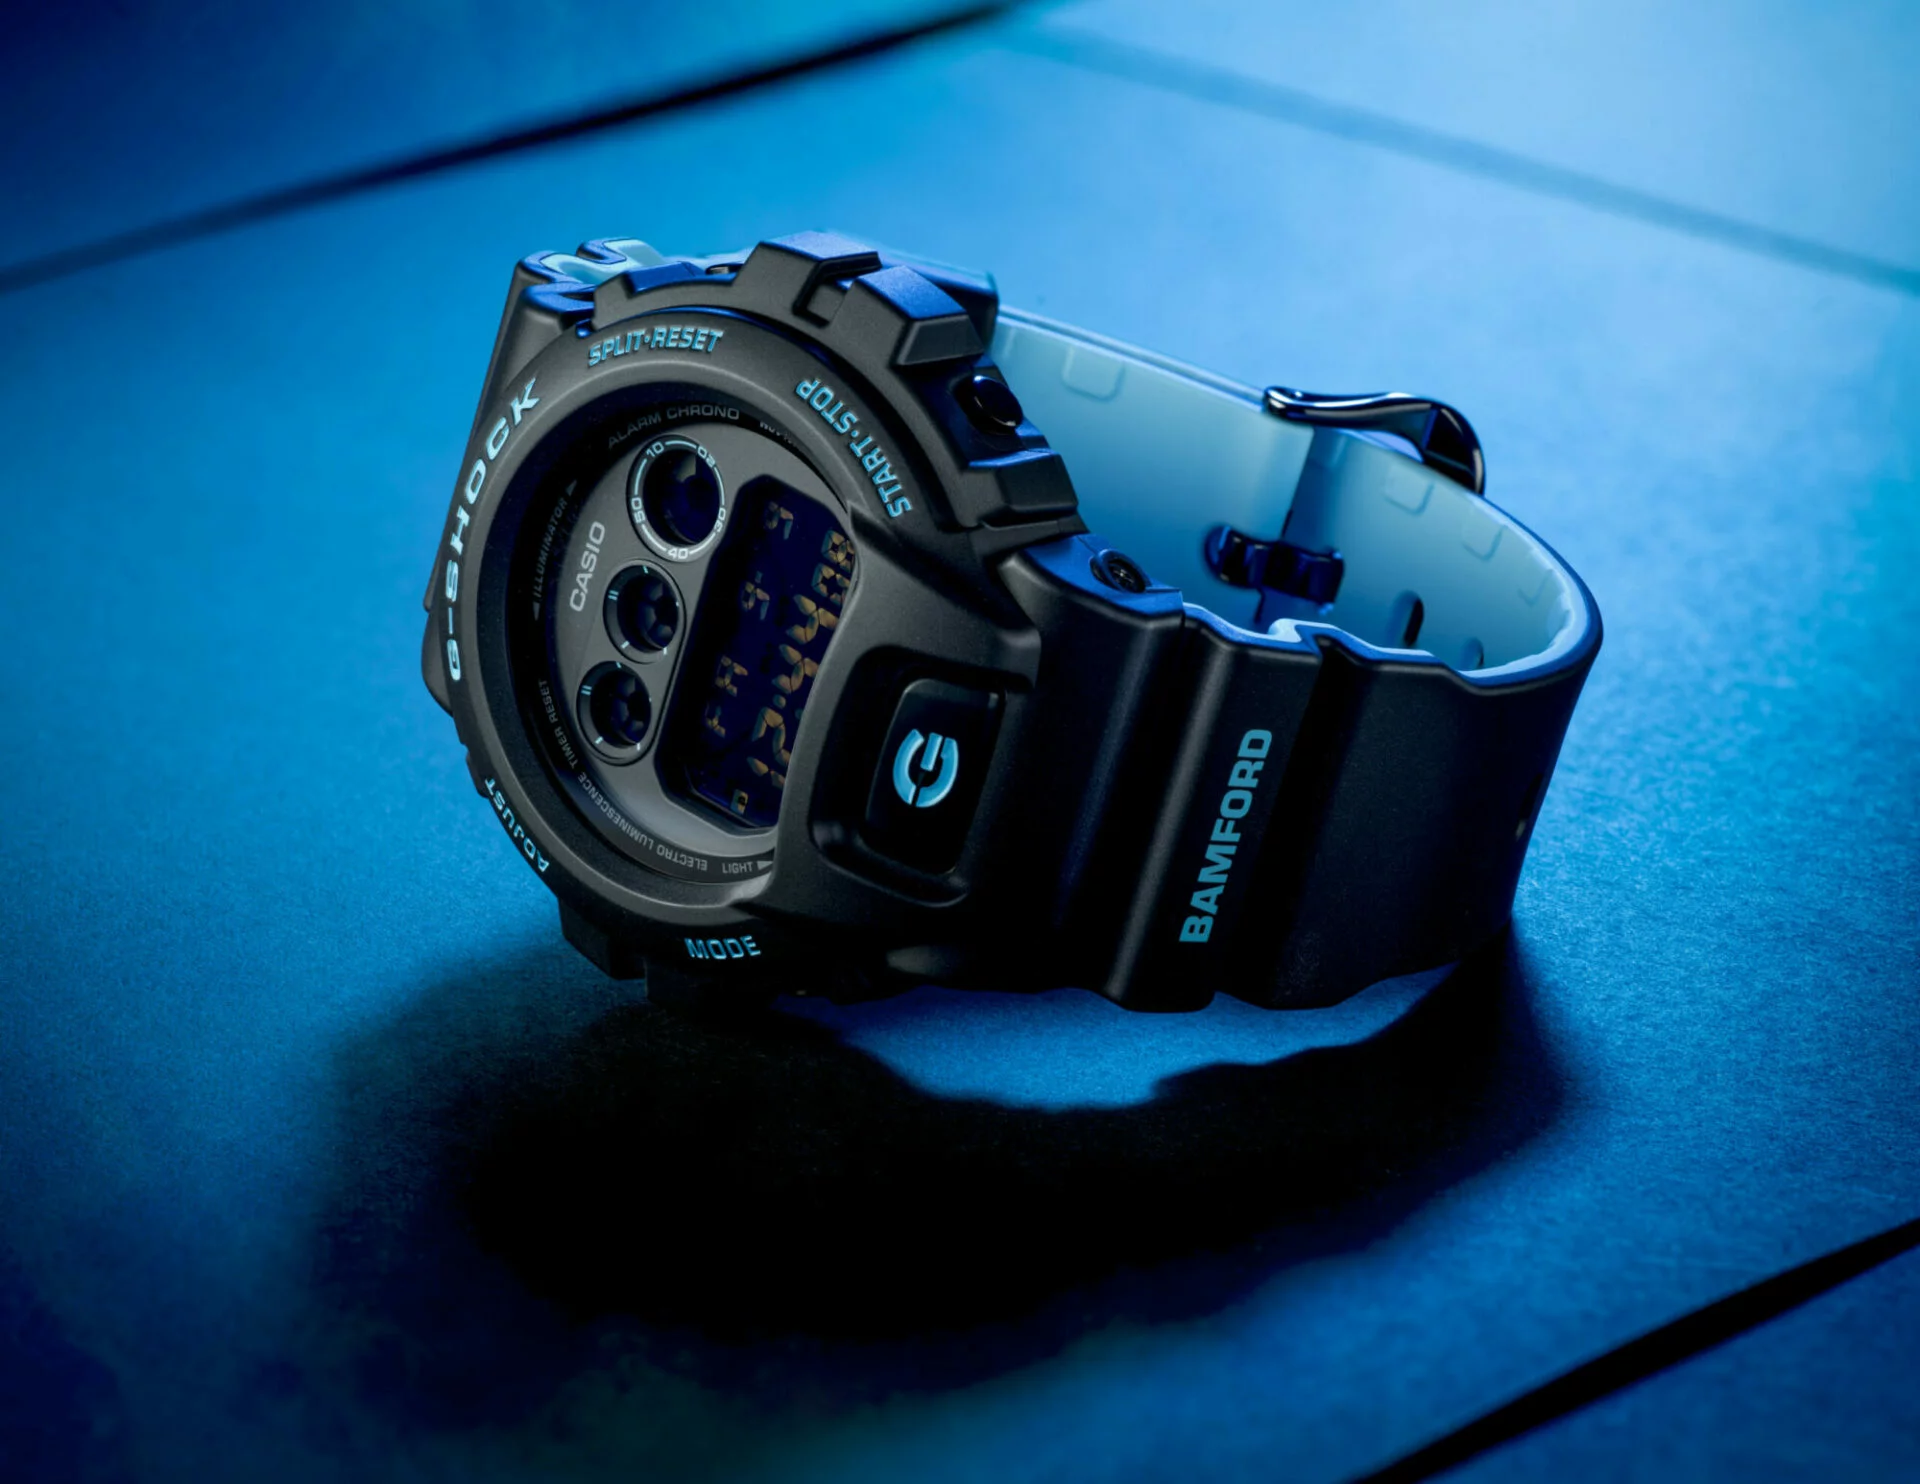 Our anti-flipper launch of the Bamford G-Shock DW-6900BWD